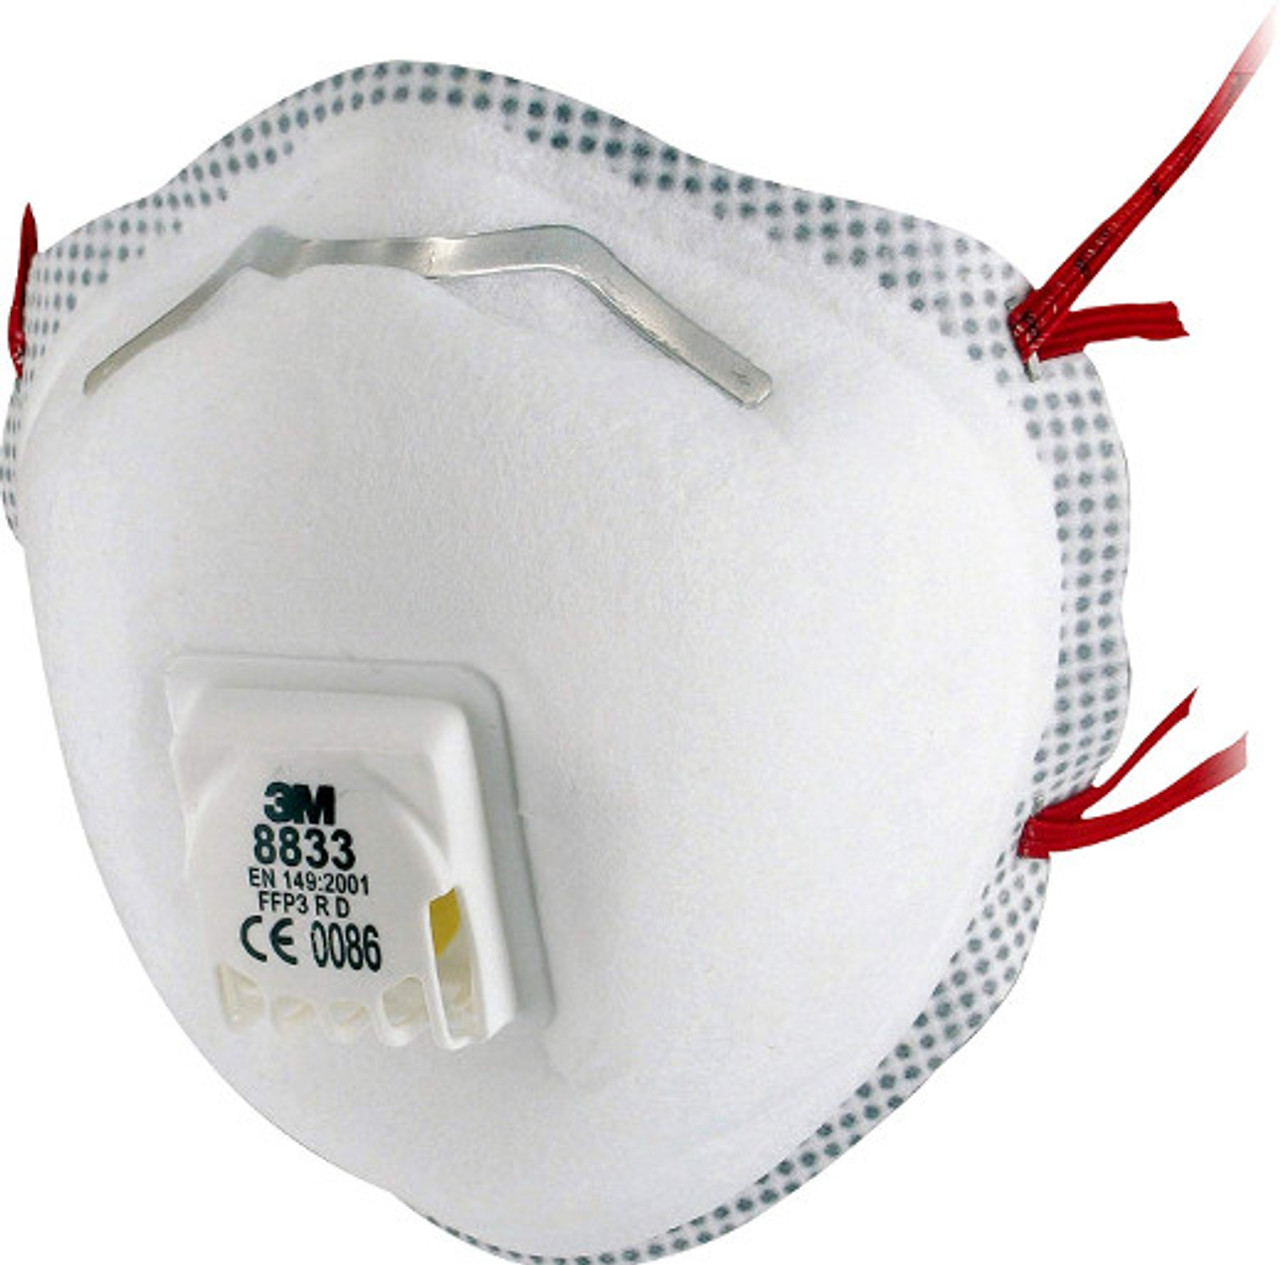 3m 8833 Respirator Ffp3 Face Mask The Face Mask Store